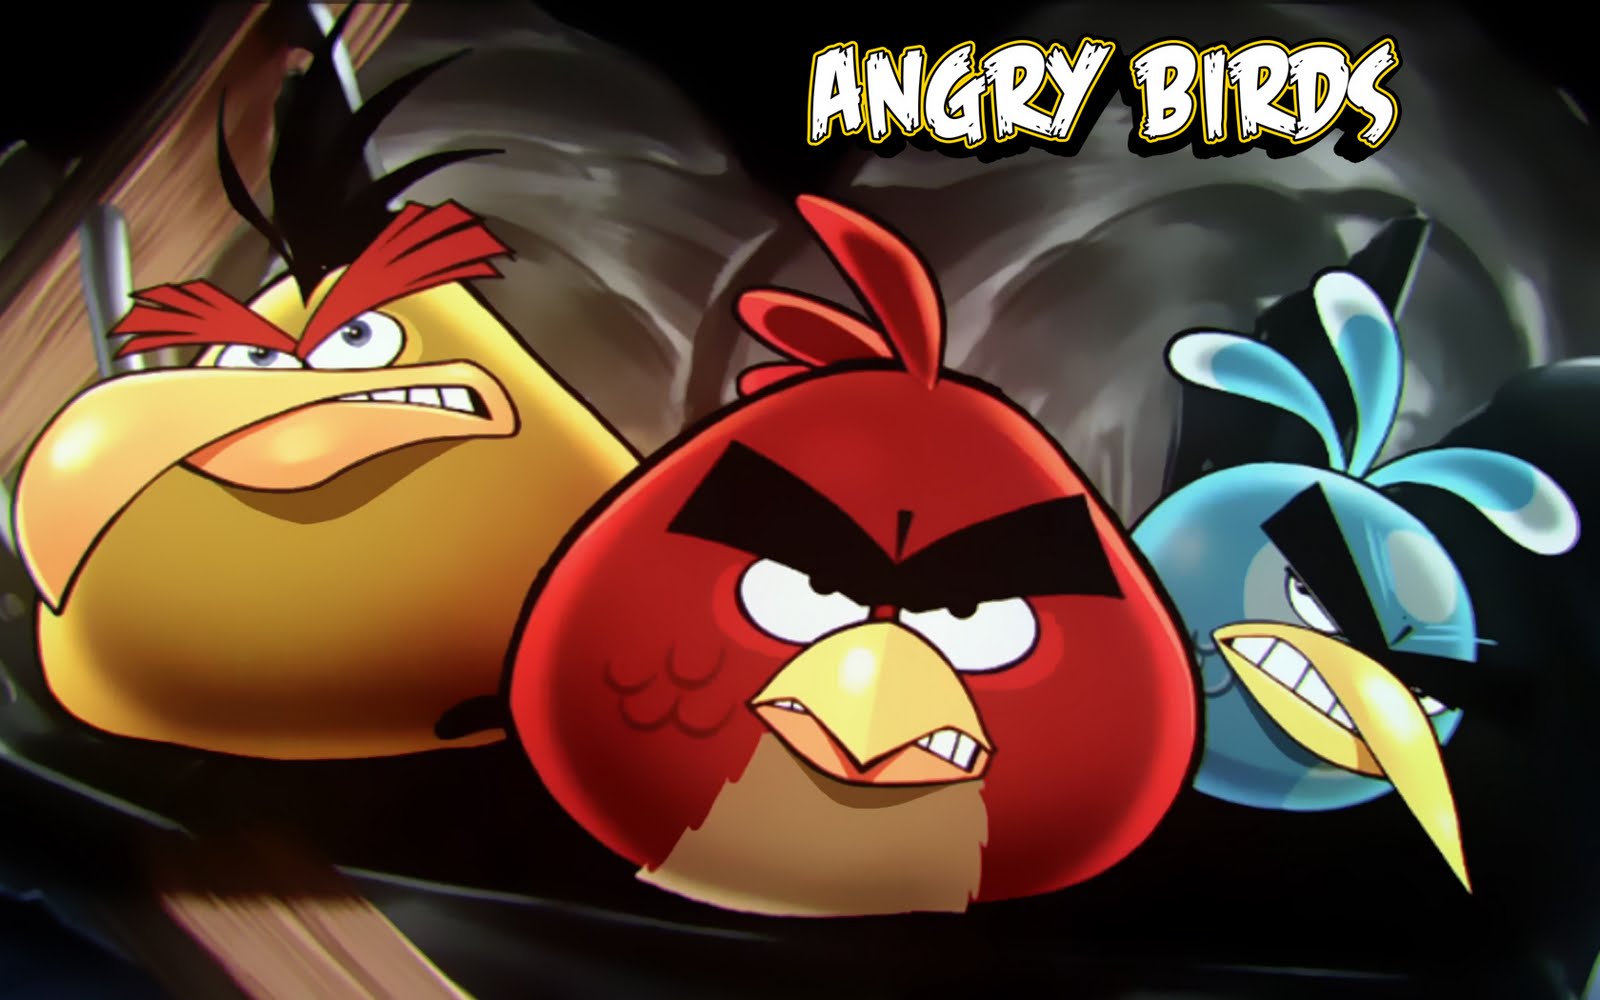 angry birds cute hd wallpapers angry birds cute hd wallpapers 1600x1000